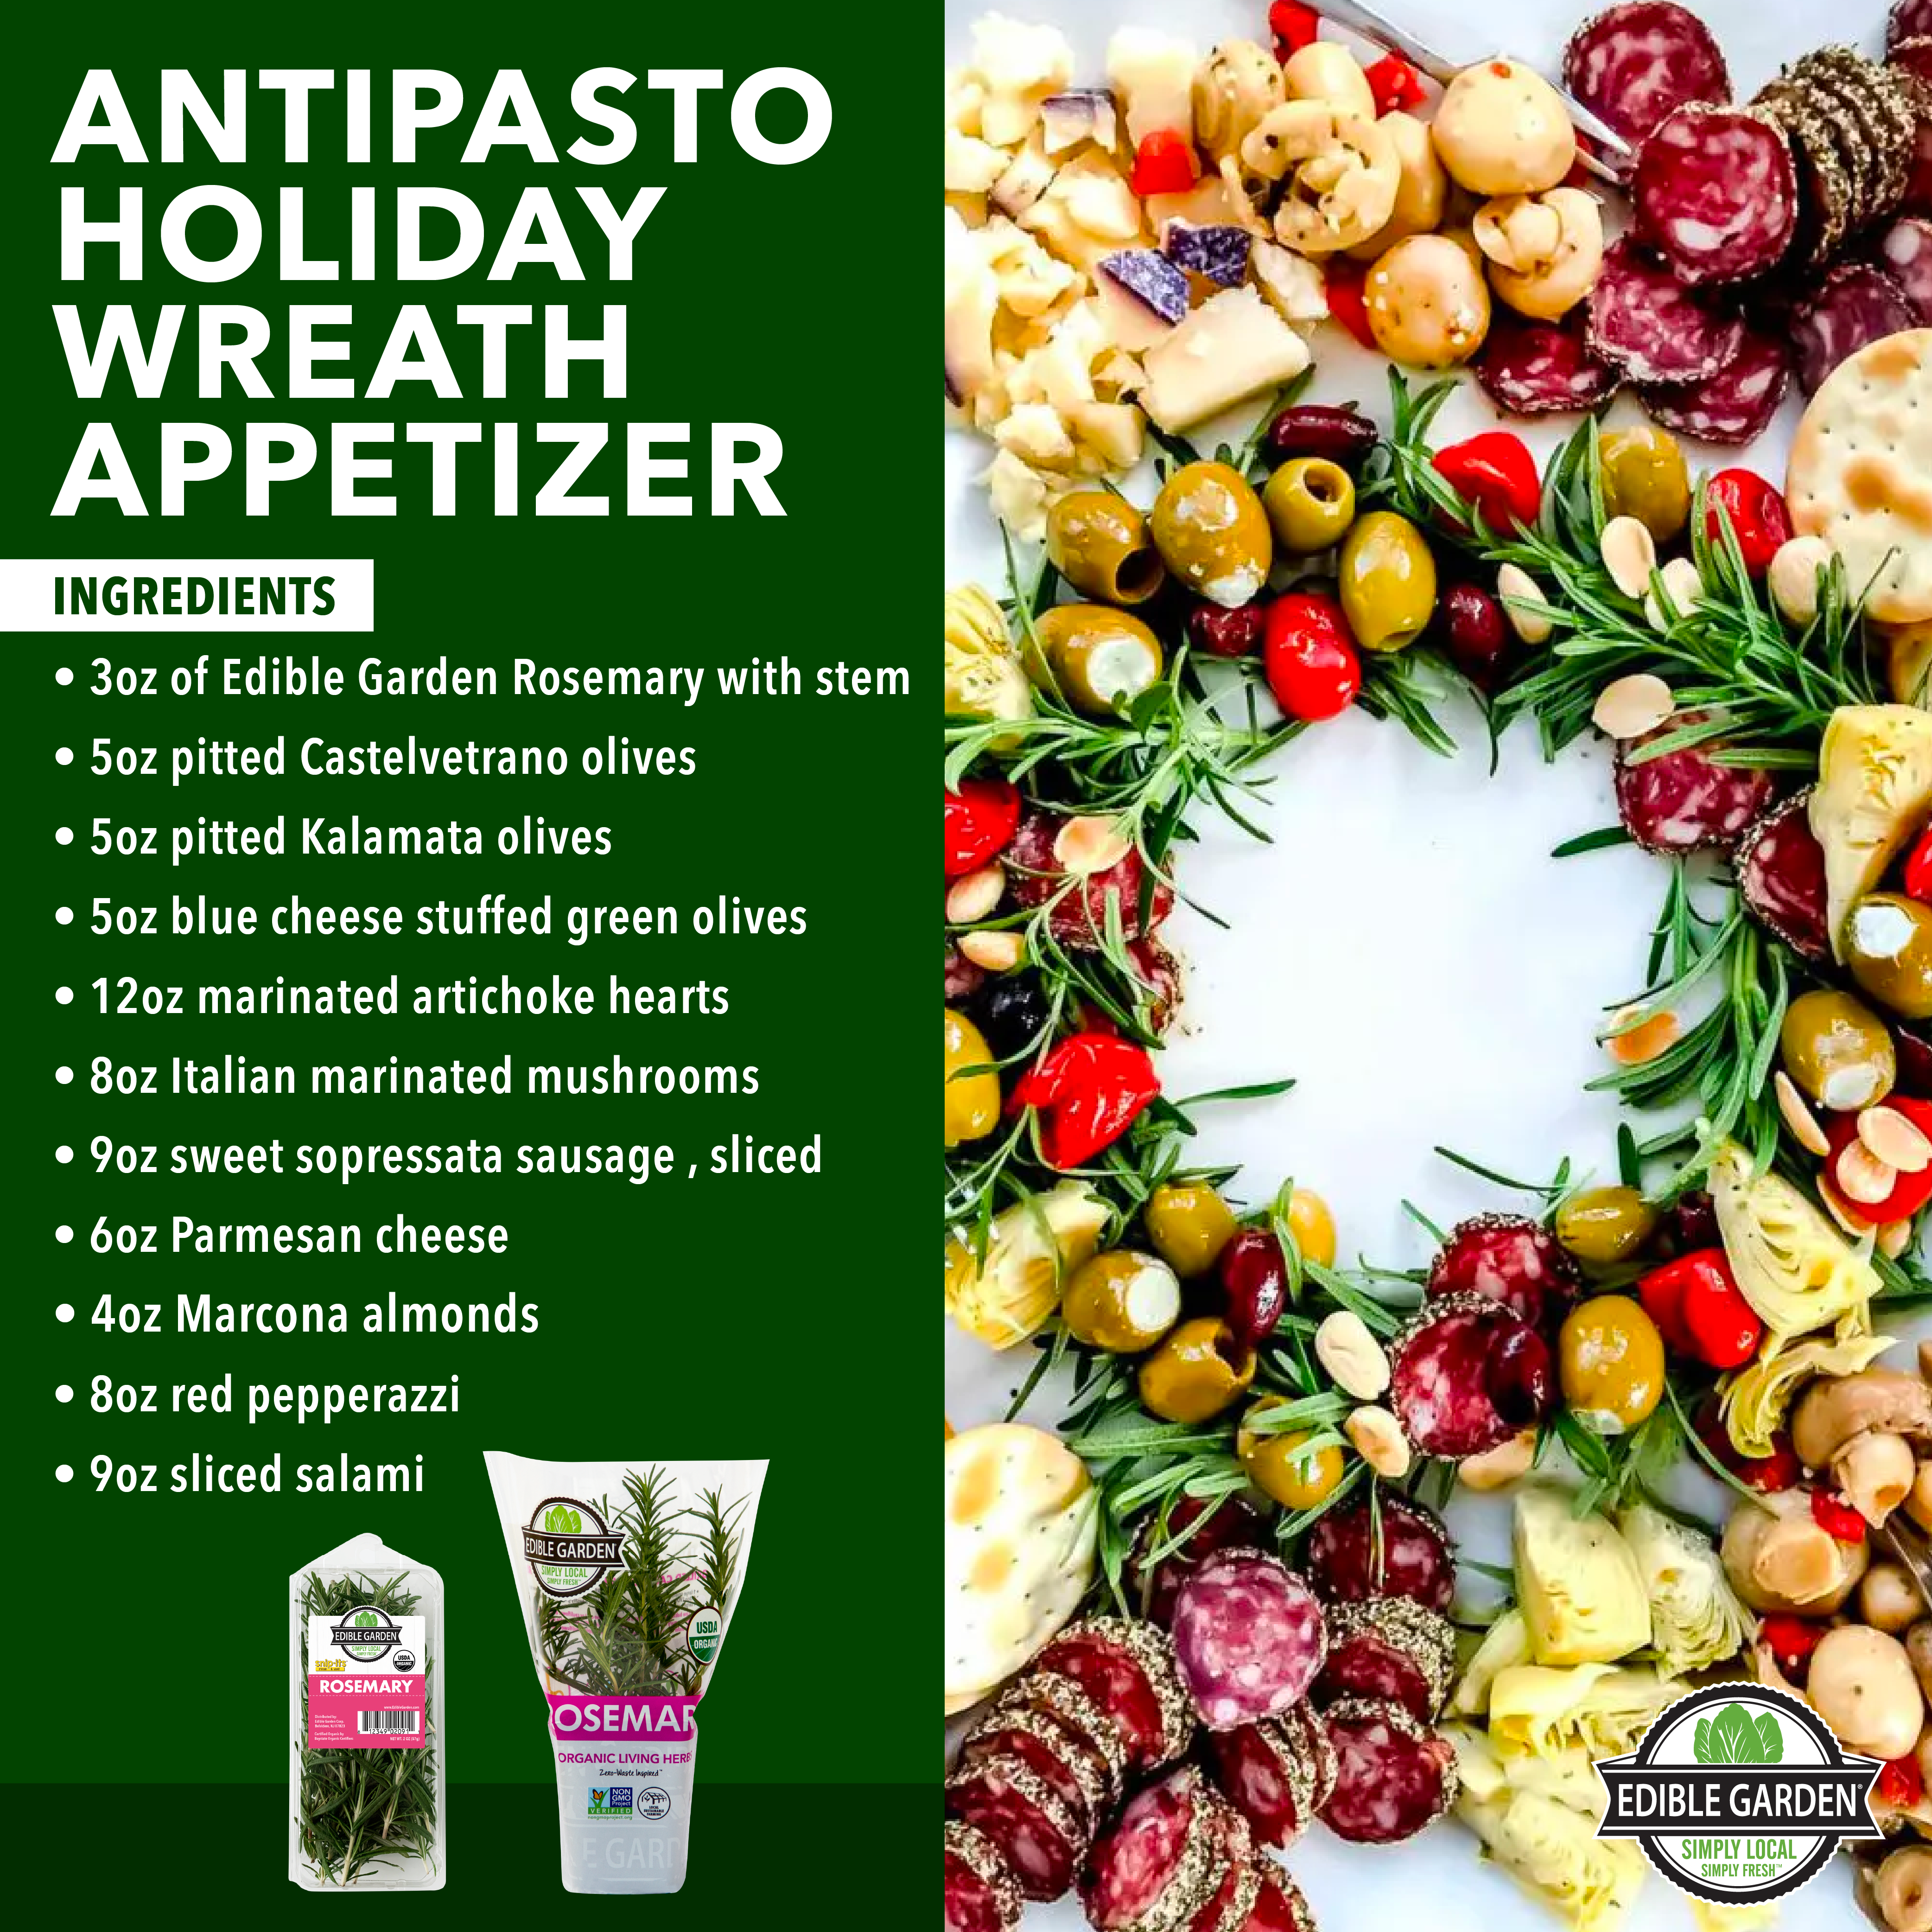 Antipasto Holiday Wreath Appetizer